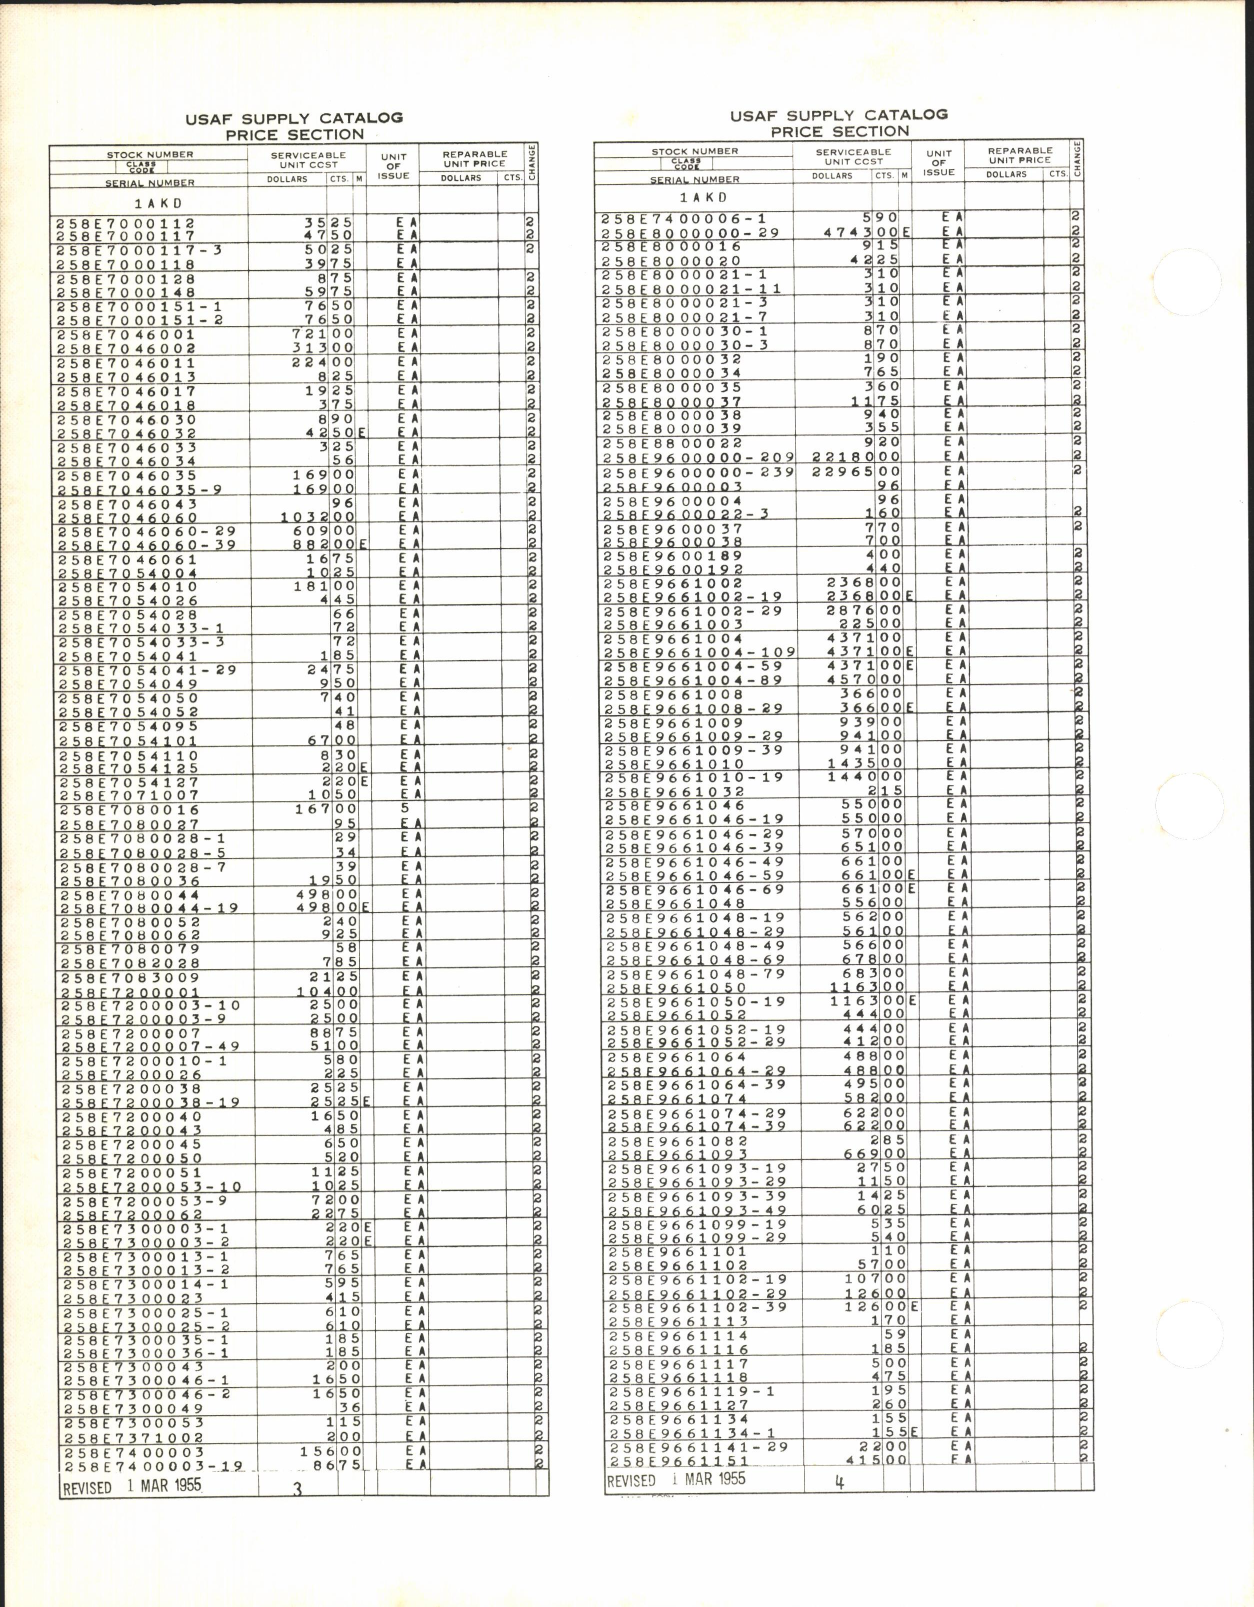 Sample page 4 from AirCorps Library document: Supply Catalog Parts for Martin B-61 Aircraft